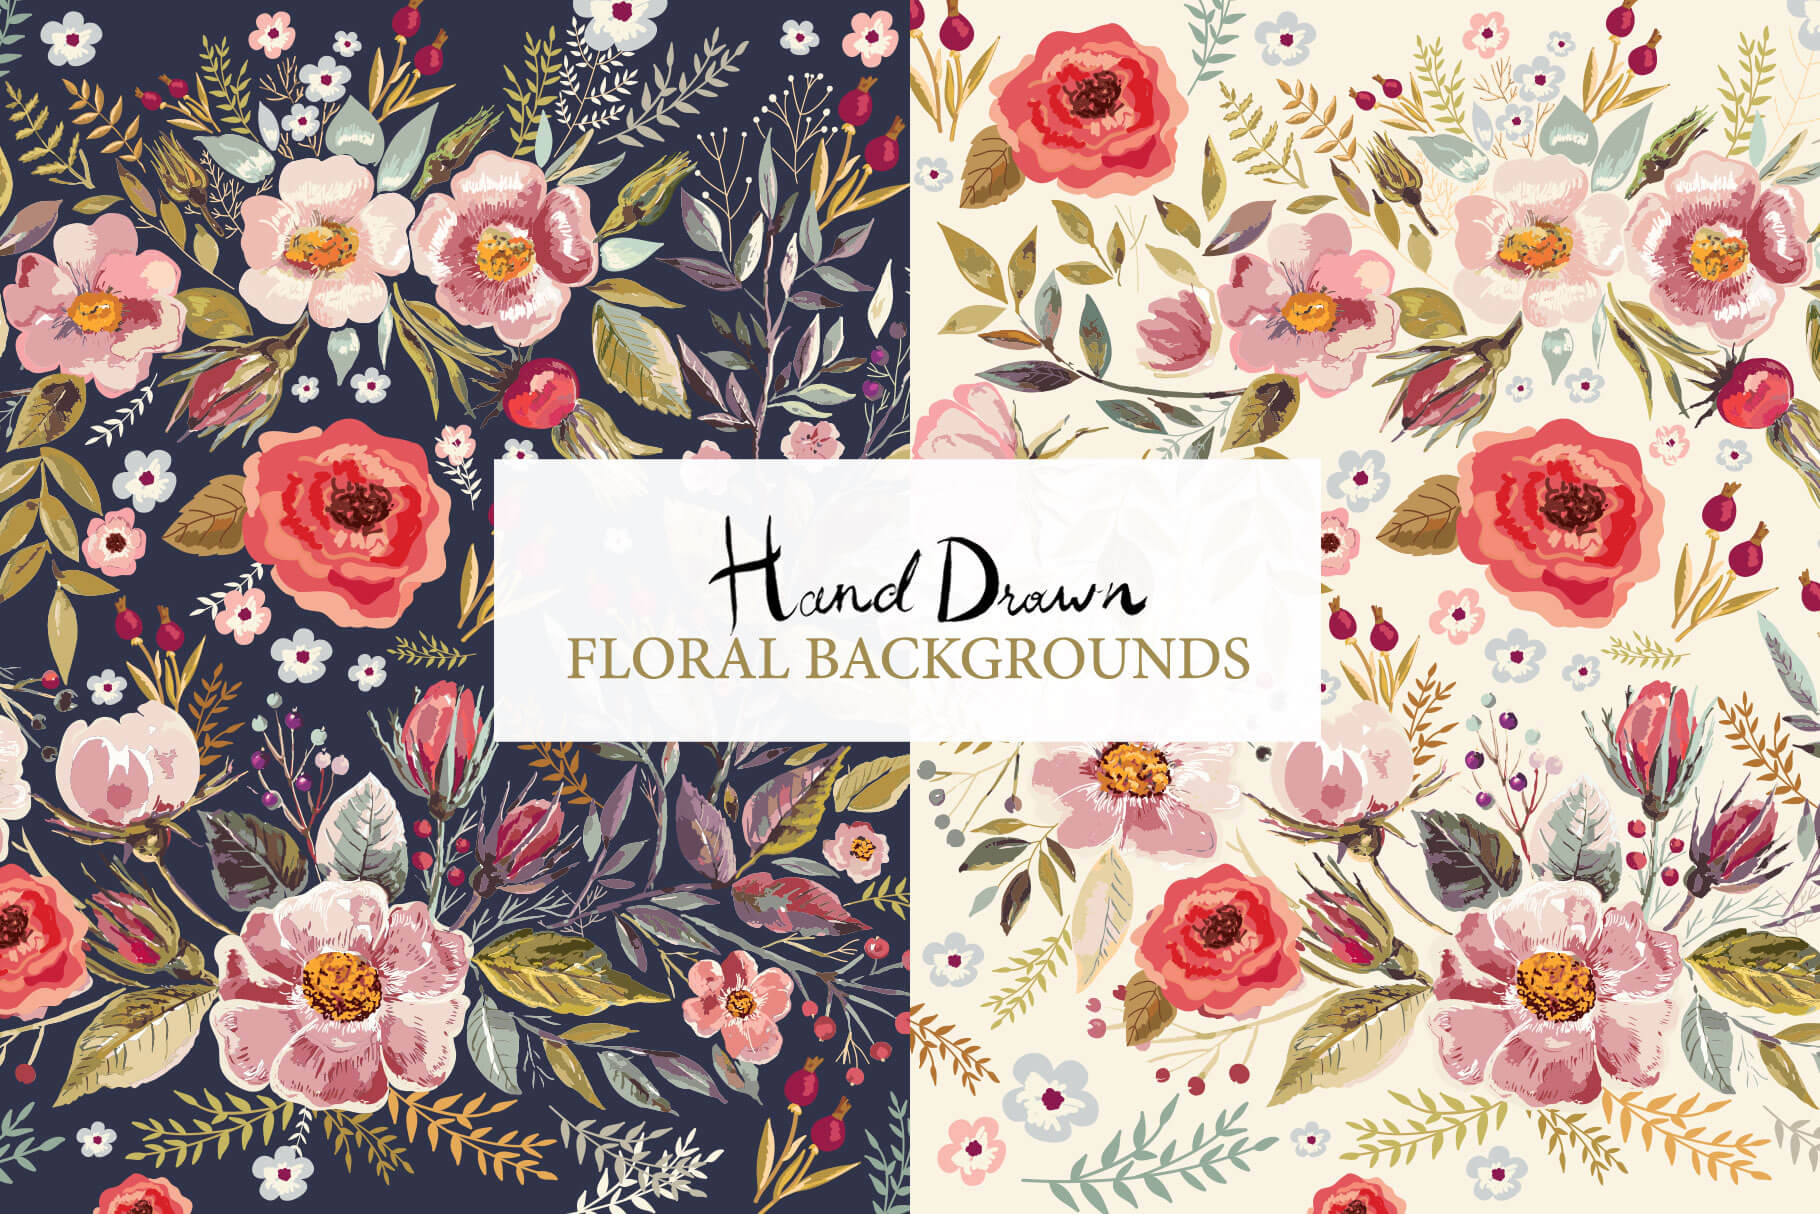 Hand Drawn Watercolor Floral Backgrounds